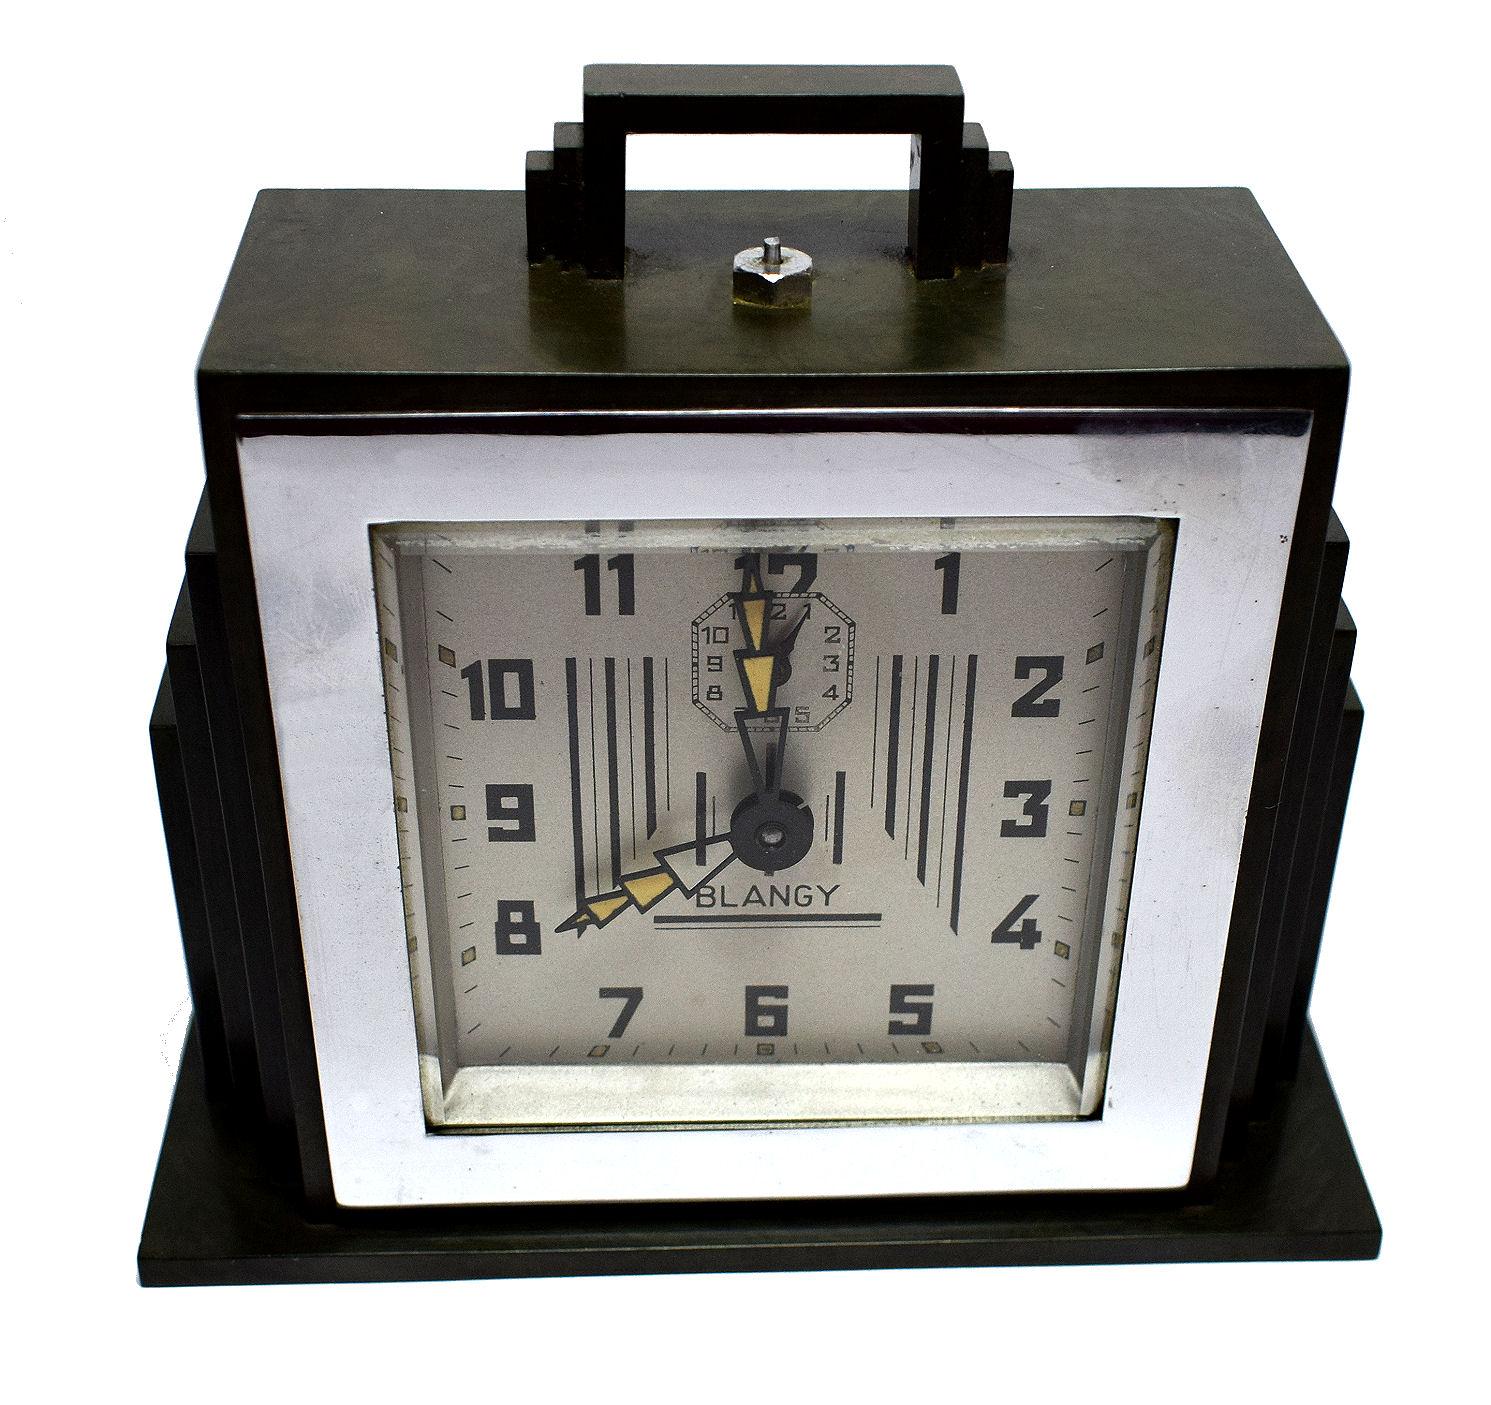 For your consideration is this very fine example of a 1930s Art Deco green bakelite clock by Blangy. Blangy is a French clock maker and in our opinion offers some of the most distinctive Art Deco clocks available. This example is no exception and